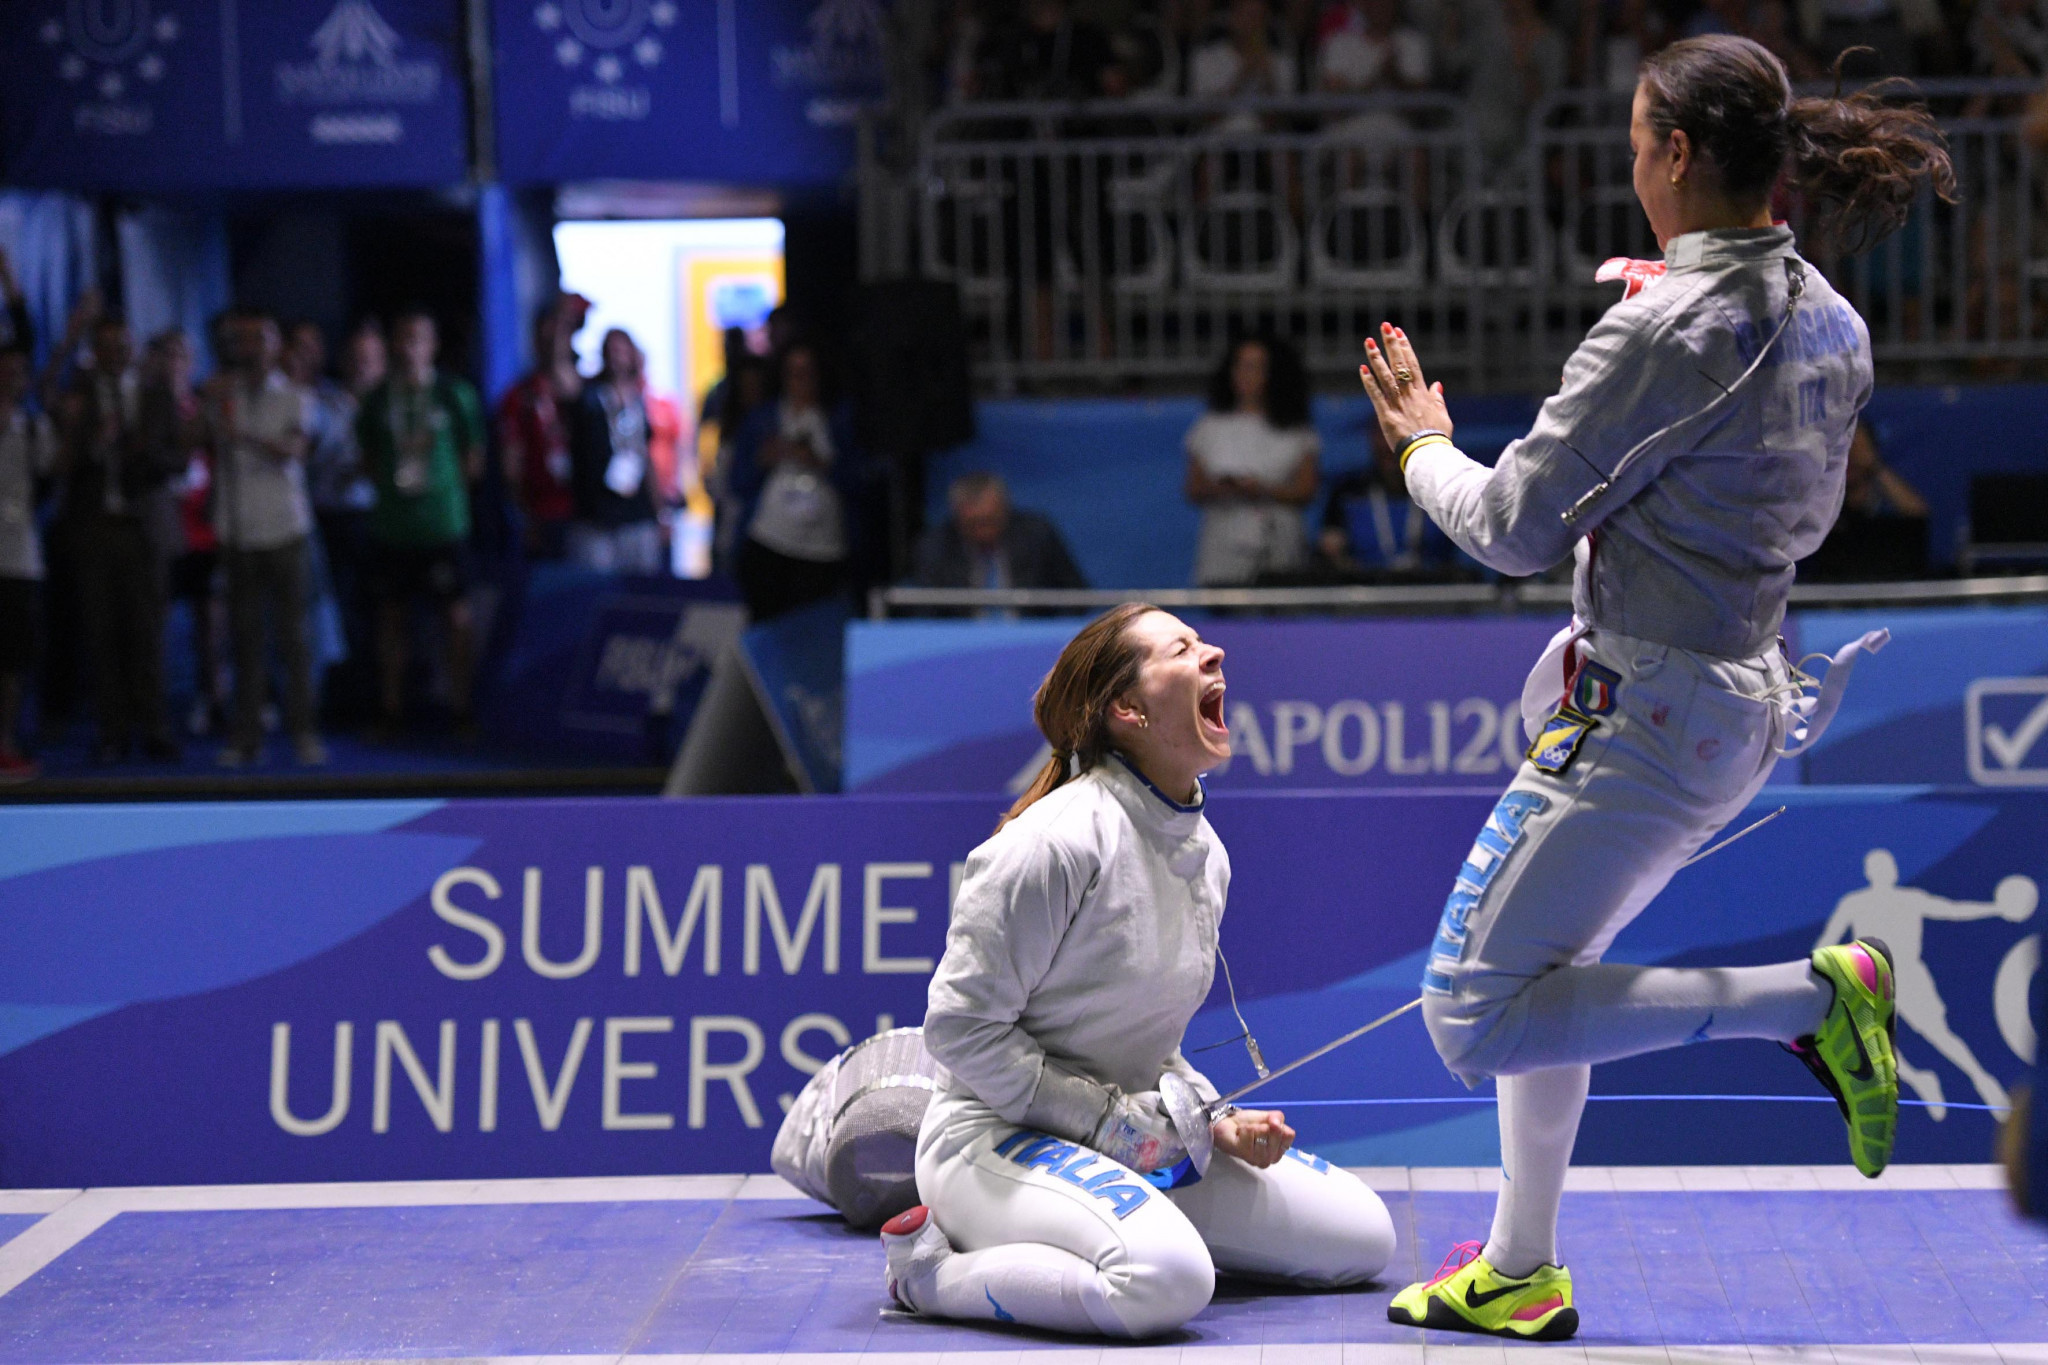 Italy won two gold medals on the last day of fencing at Naples 2019 ©Naples 2019